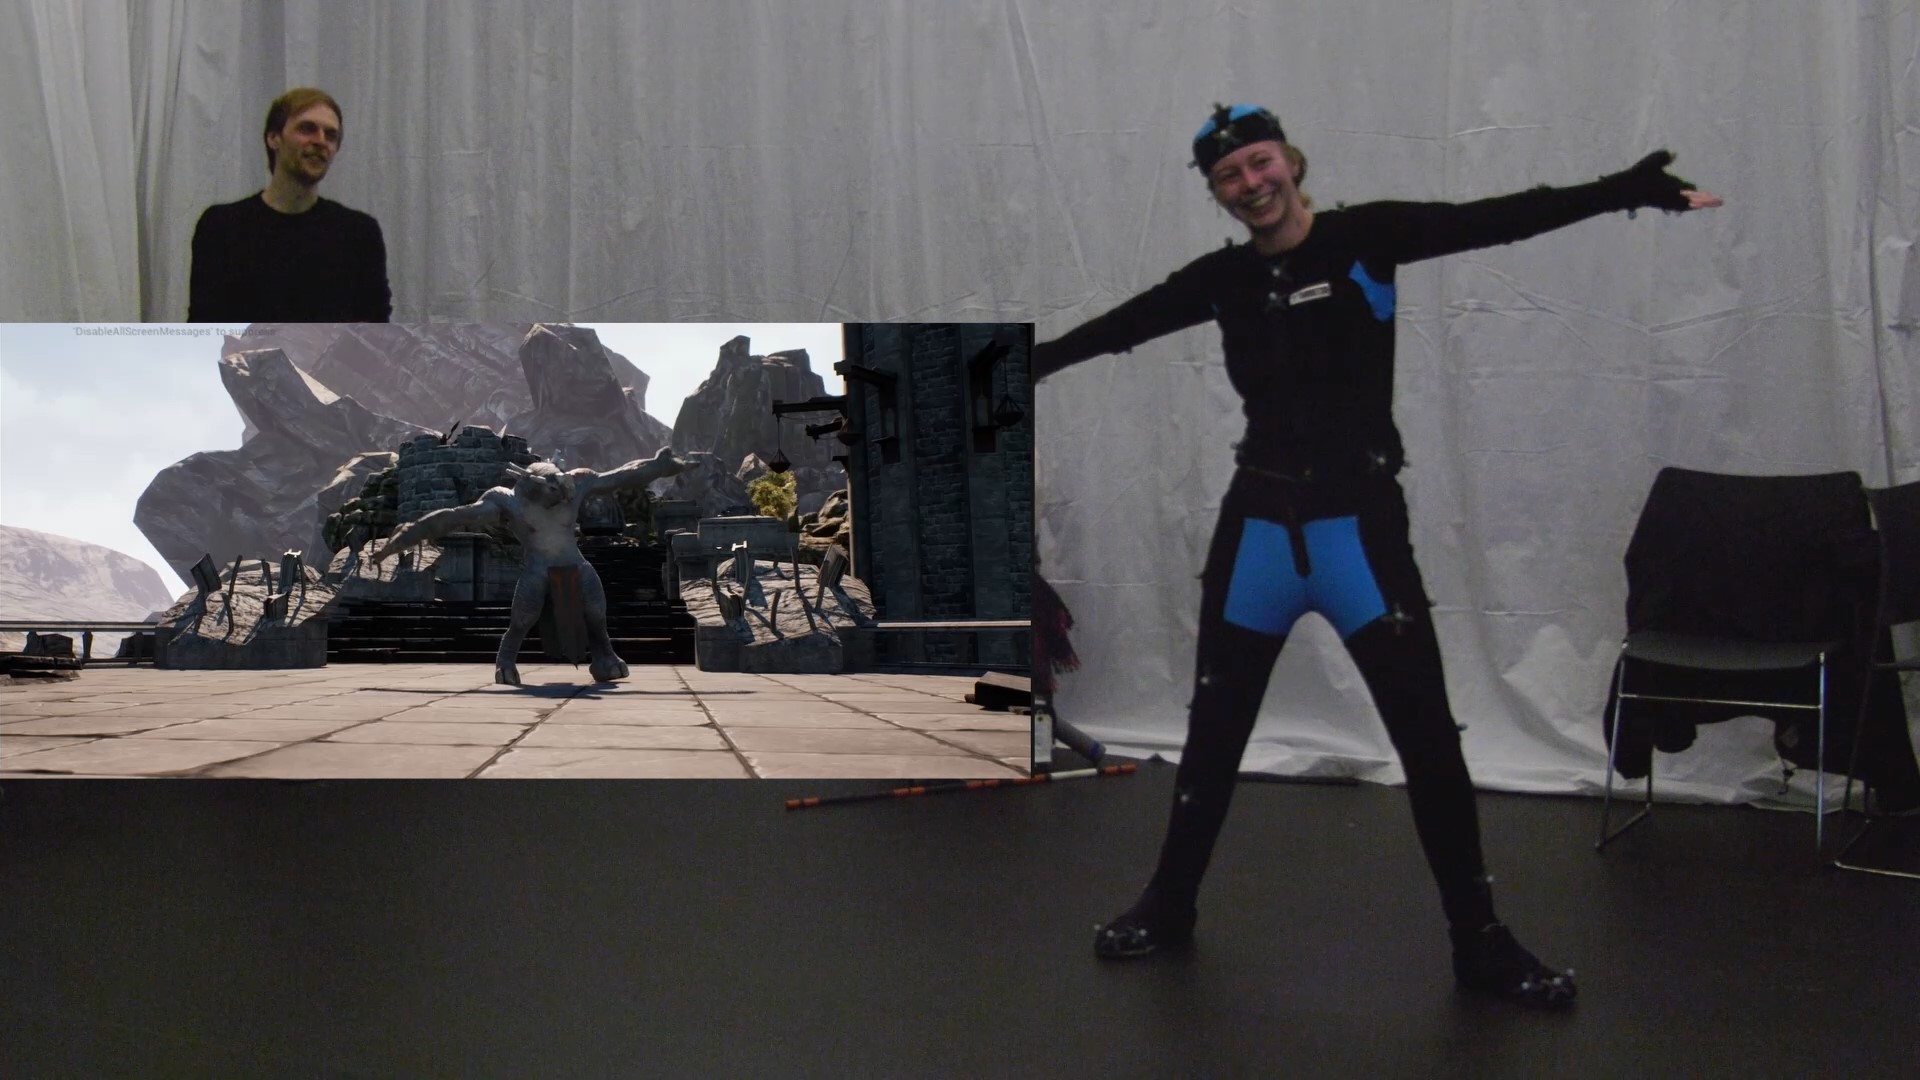 The image shows a student in a mocap suit next to their onscreen avatar